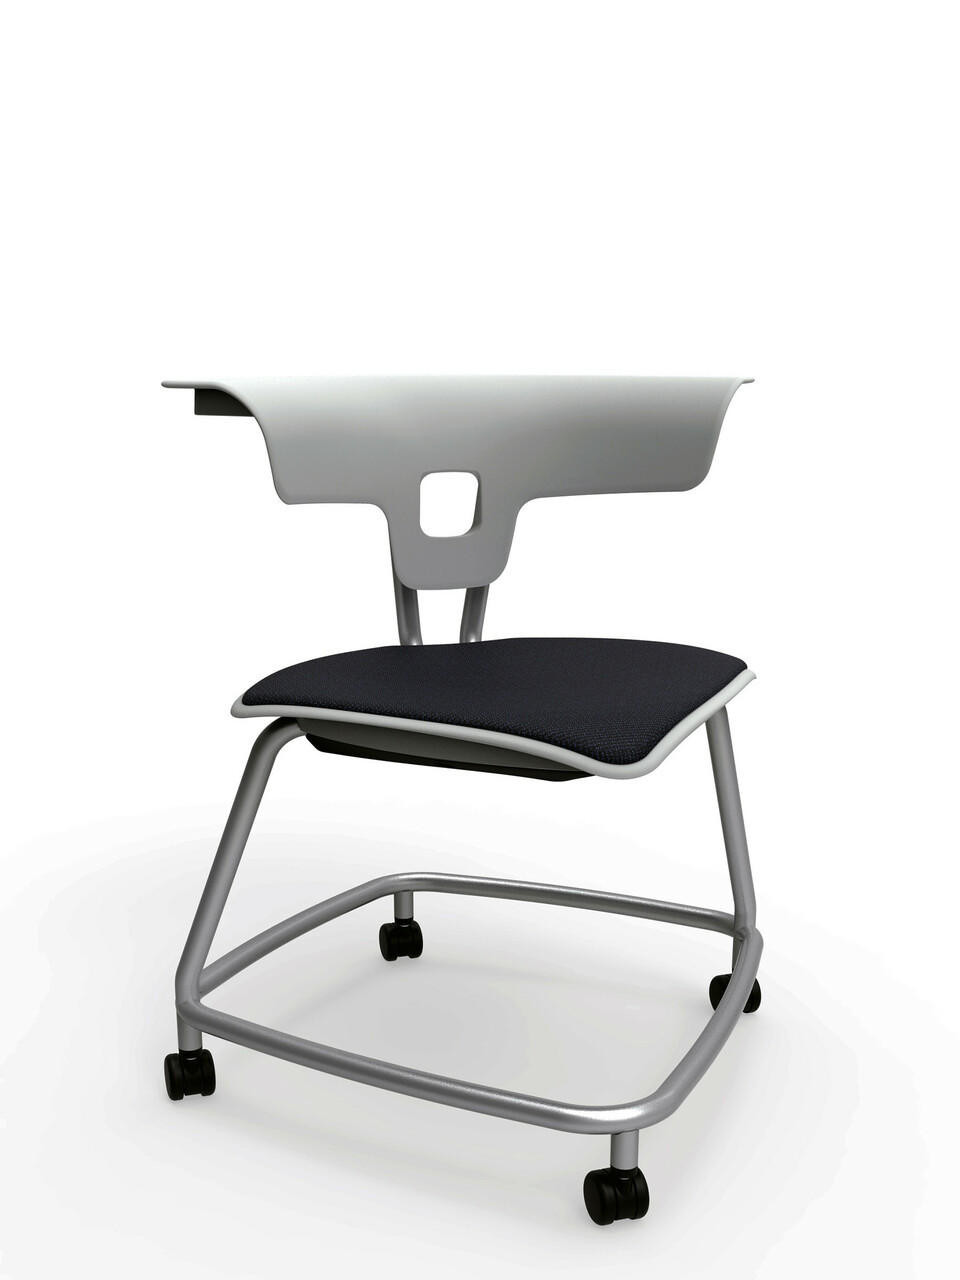 https://www.shifflerequip.com/ki-ruckus-chair-15-h-seat-with-casters-poly-seat/